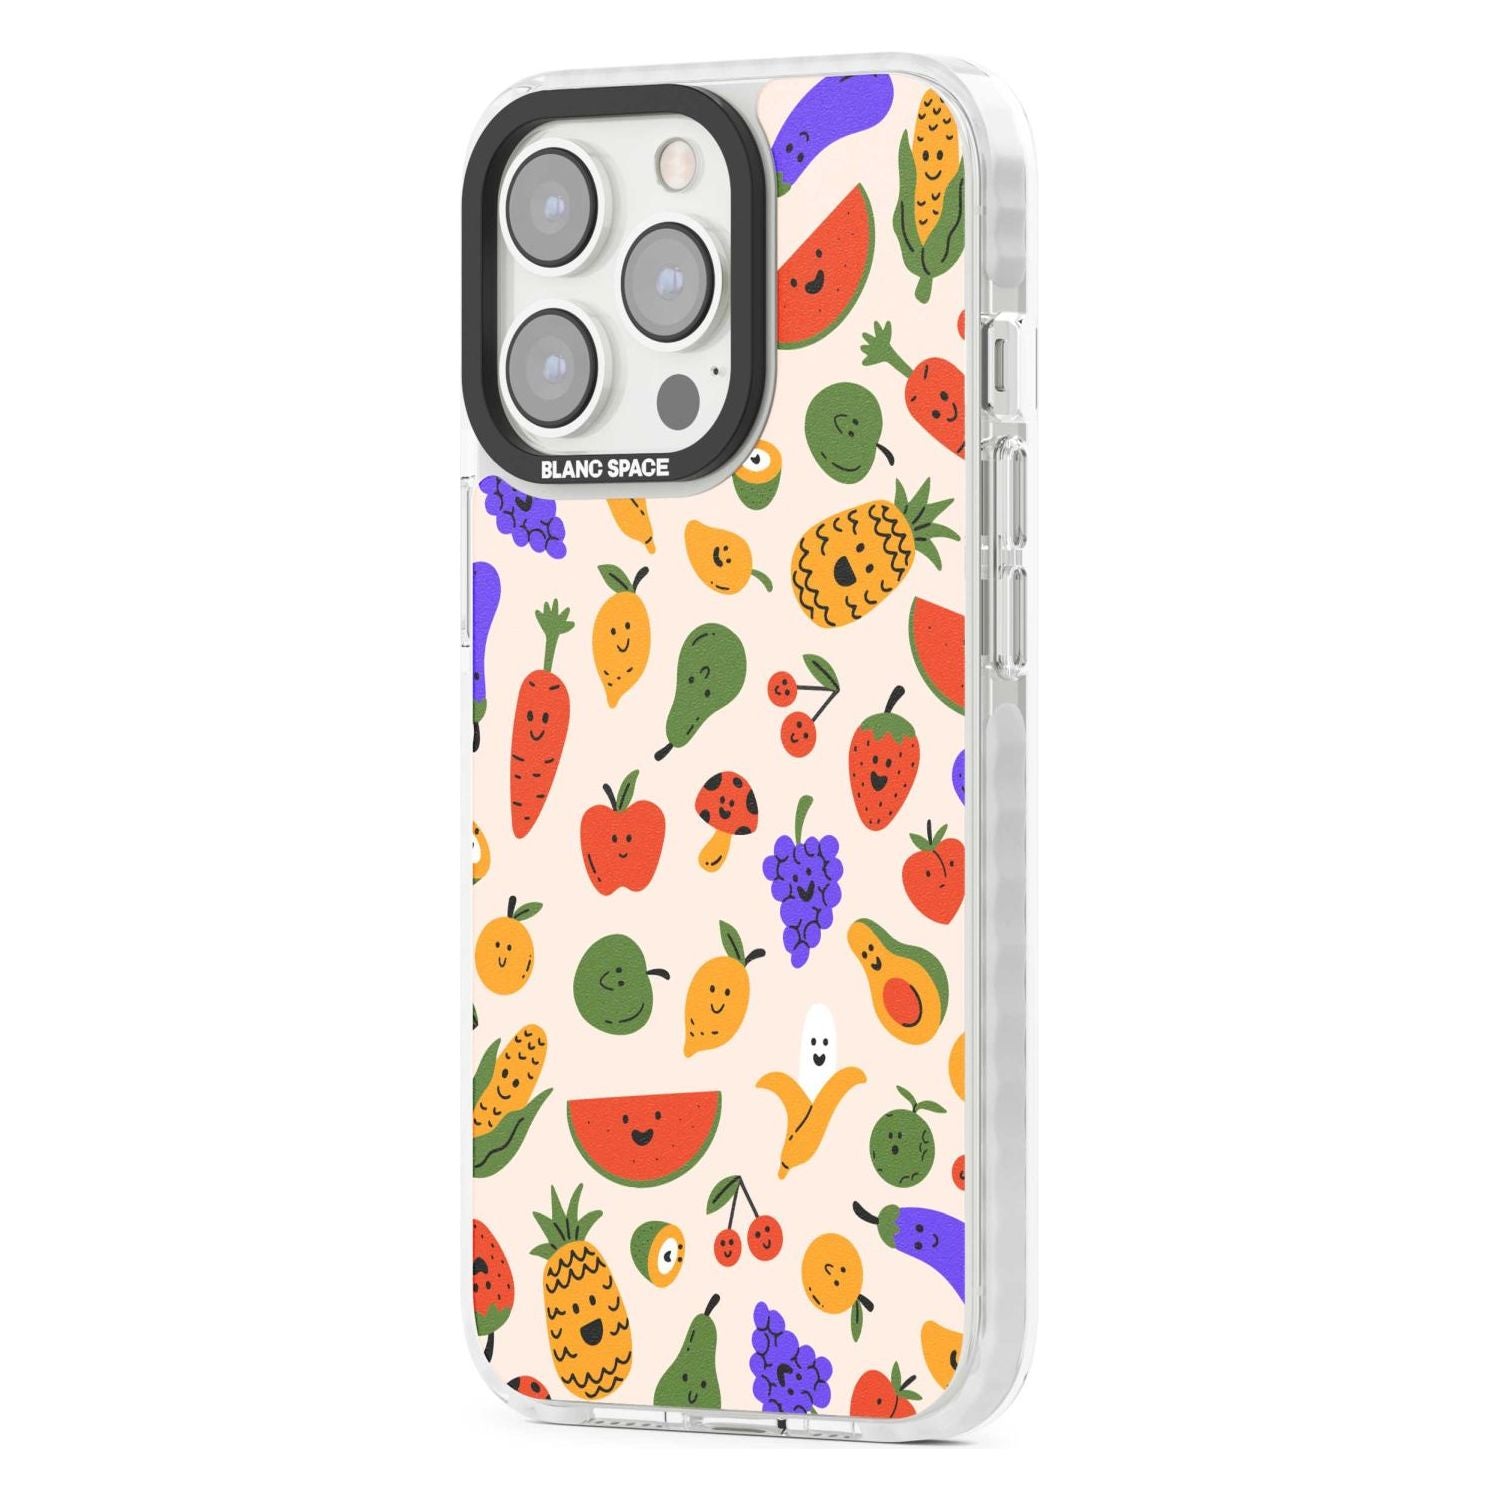 Mixed Kawaii Food Icons - Solid Phone Case iPhone 15 Pro Max / Black Impact Case,iPhone 15 Plus / Black Impact Case,iPhone 15 Pro / Black Impact Case,iPhone 15 / Black Impact Case,iPhone 15 Pro Max / Impact Case,iPhone 15 Plus / Impact Case,iPhone 15 Pro / Impact Case,iPhone 15 / Impact Case,iPhone 15 Pro Max / Magsafe Black Impact Case,iPhone 15 Plus / Magsafe Black Impact Case,iPhone 15 Pro / Magsafe Black Impact Case,iPhone 15 / Magsafe Black Impact Case,iPhone 14 Pro Max / Black Impact Case,iPhone 14 Pl